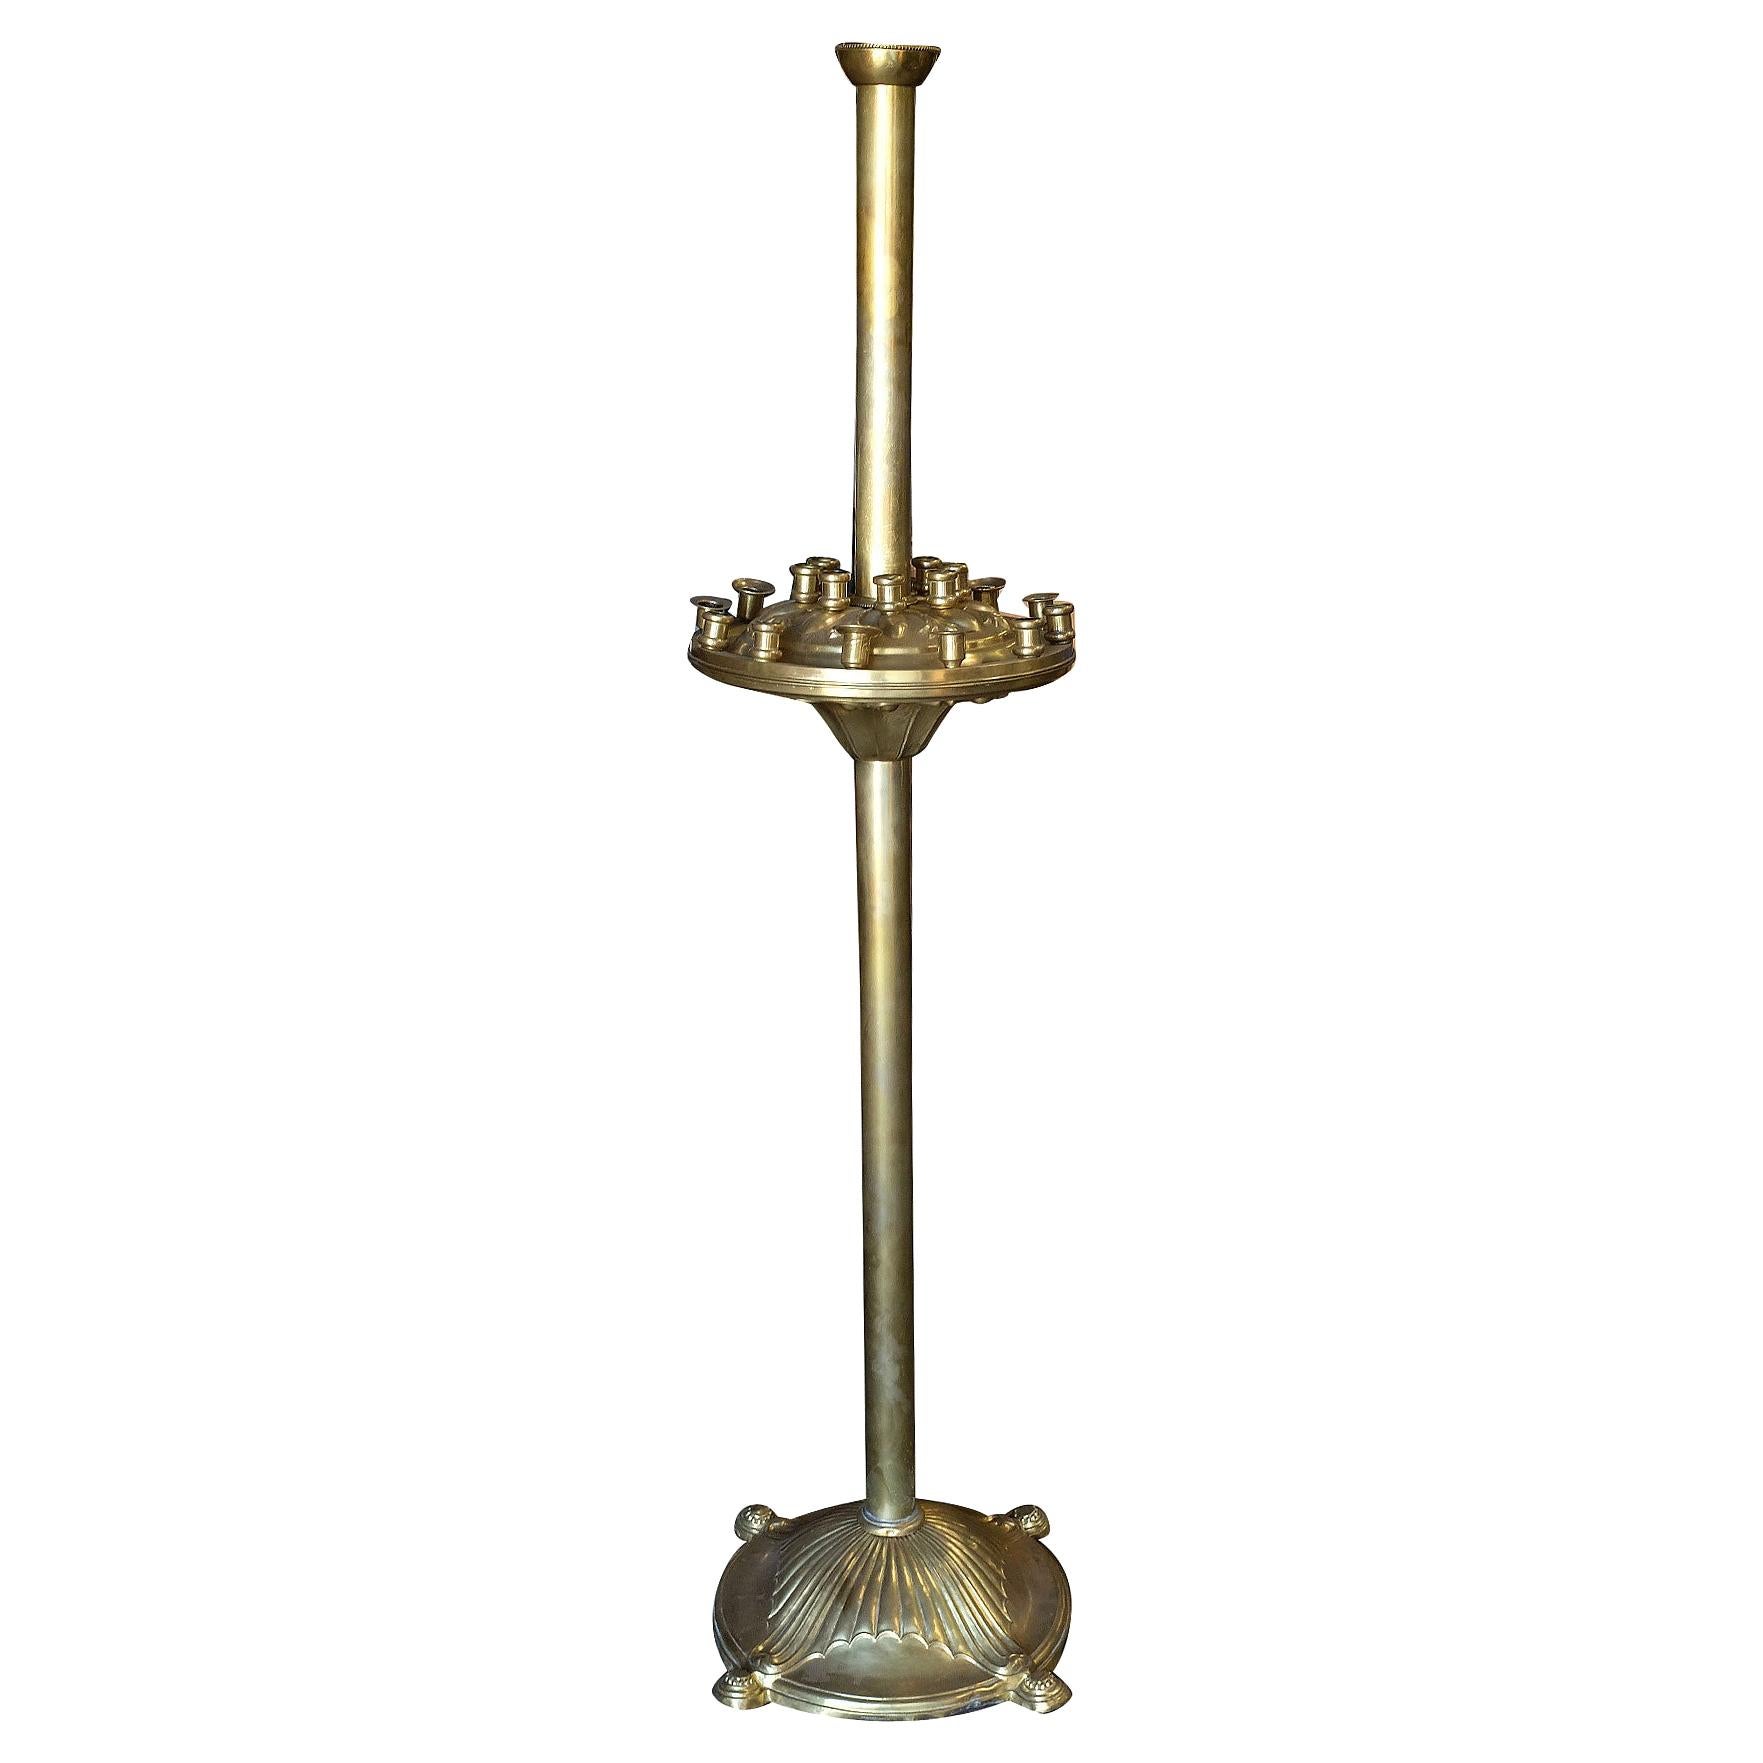 24 Candle Orthodox Ceremonial Brass Floor Candelabra, 1920 For Sale